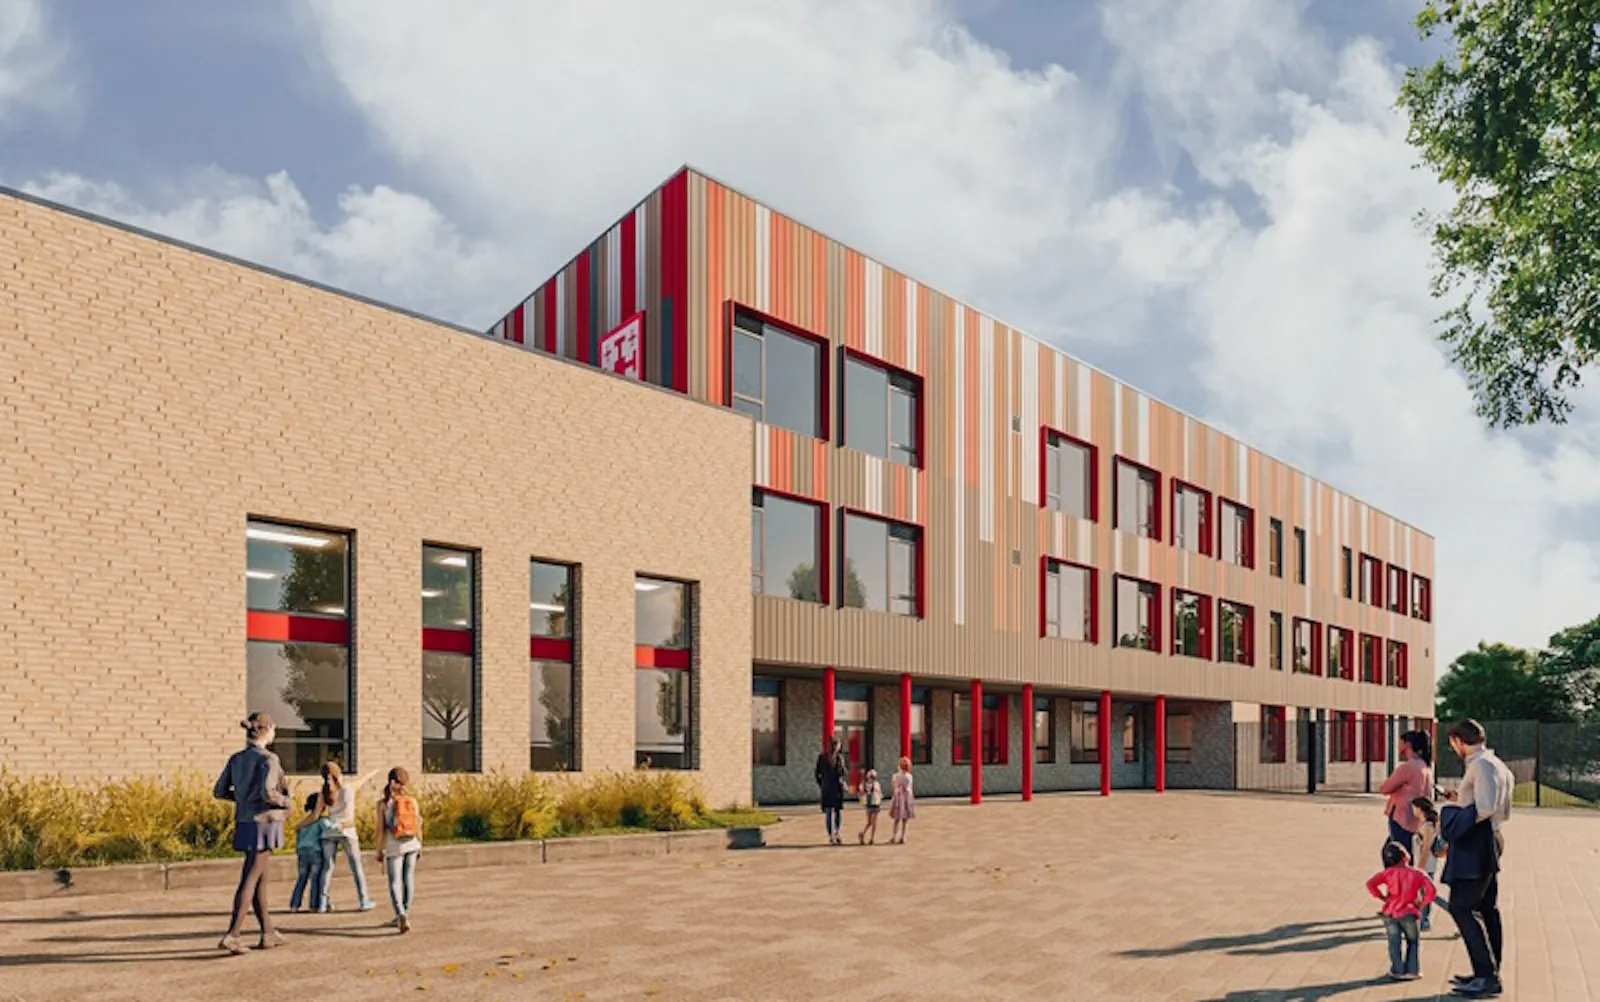 Impression of how the new school at Woodhatch Place could look